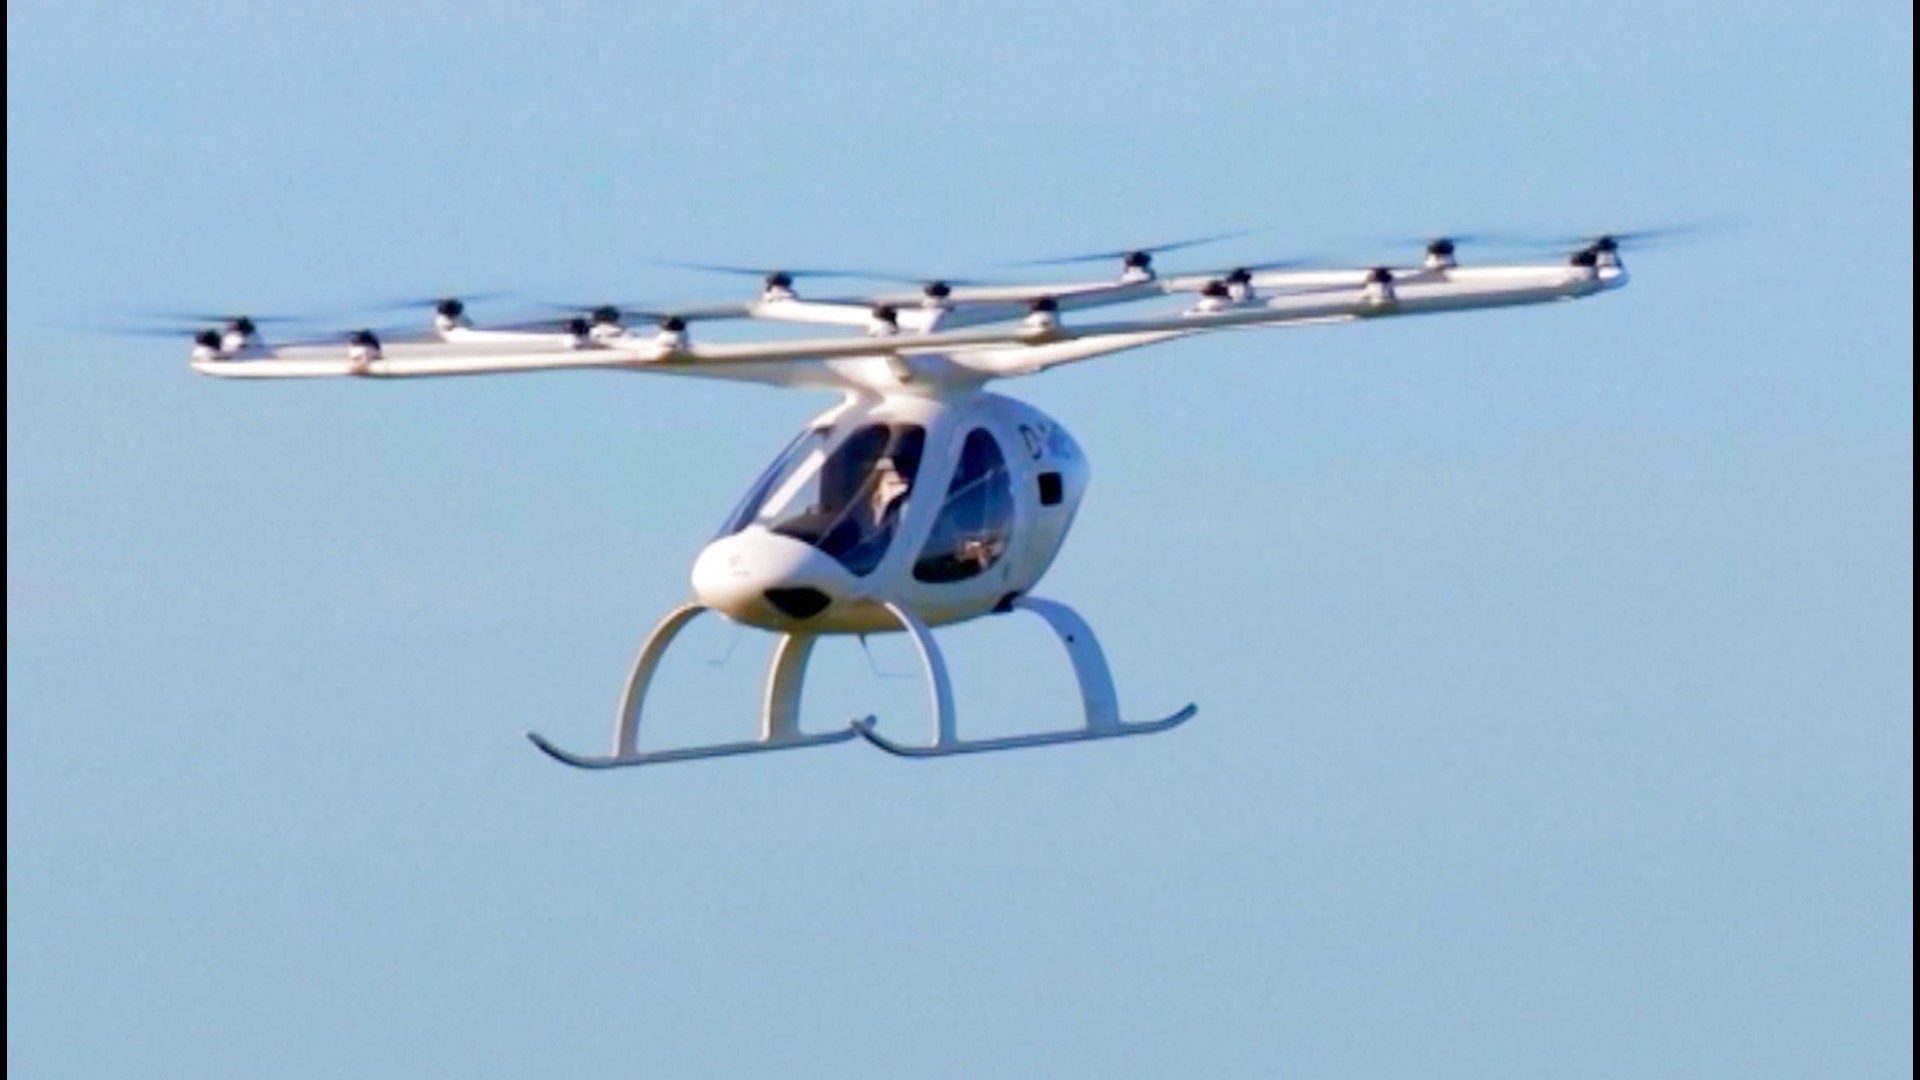 Volocopter hopes to redefine commuting. Buzz60's Tony Spitz has the details.